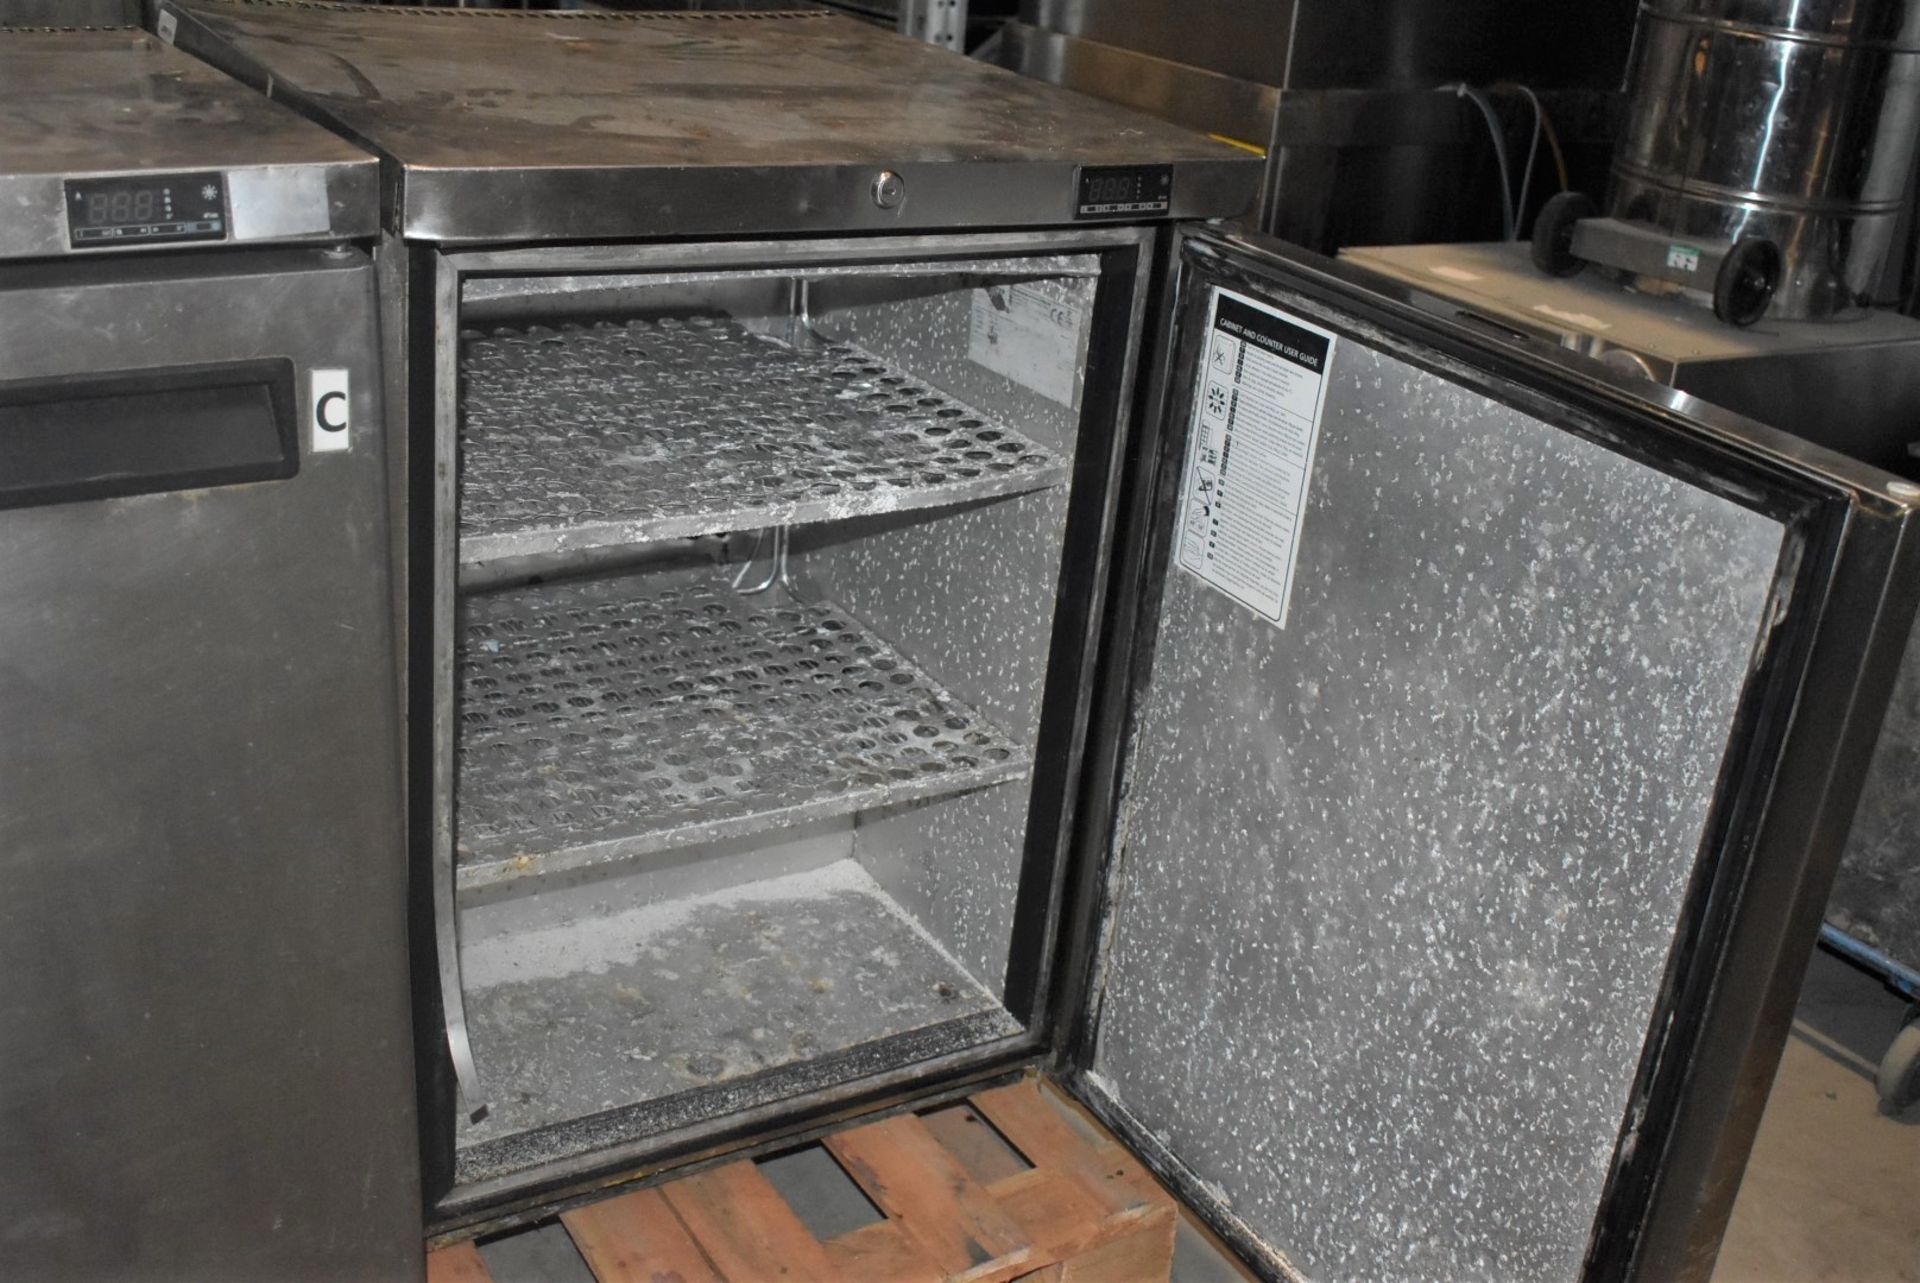 2 x Fosters Undercounter 60cm Freezers With Stainless Steel Exteriors - Image 4 of 4